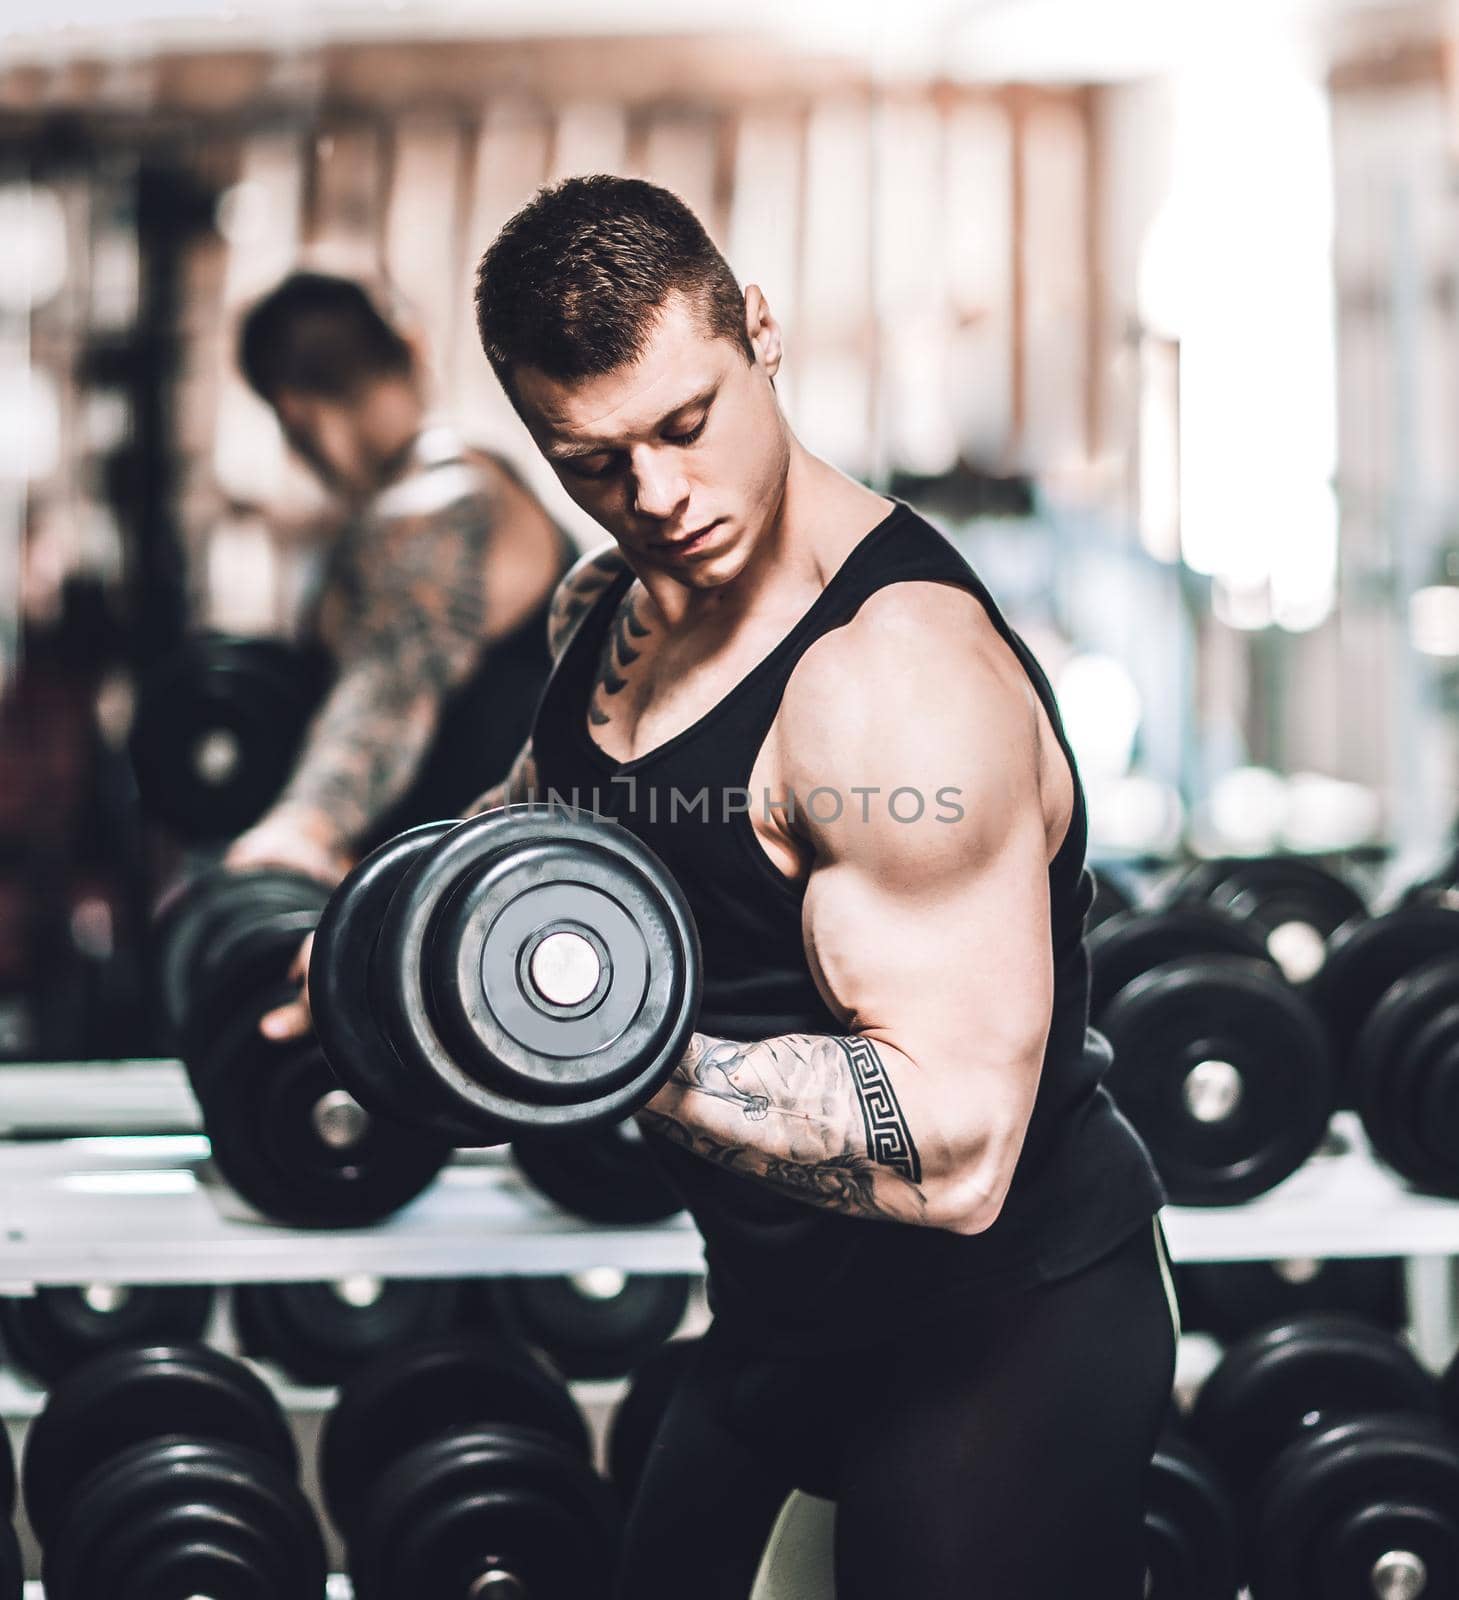 purposeful bodybuilder performs exercises with dumbbells .photo with copy space